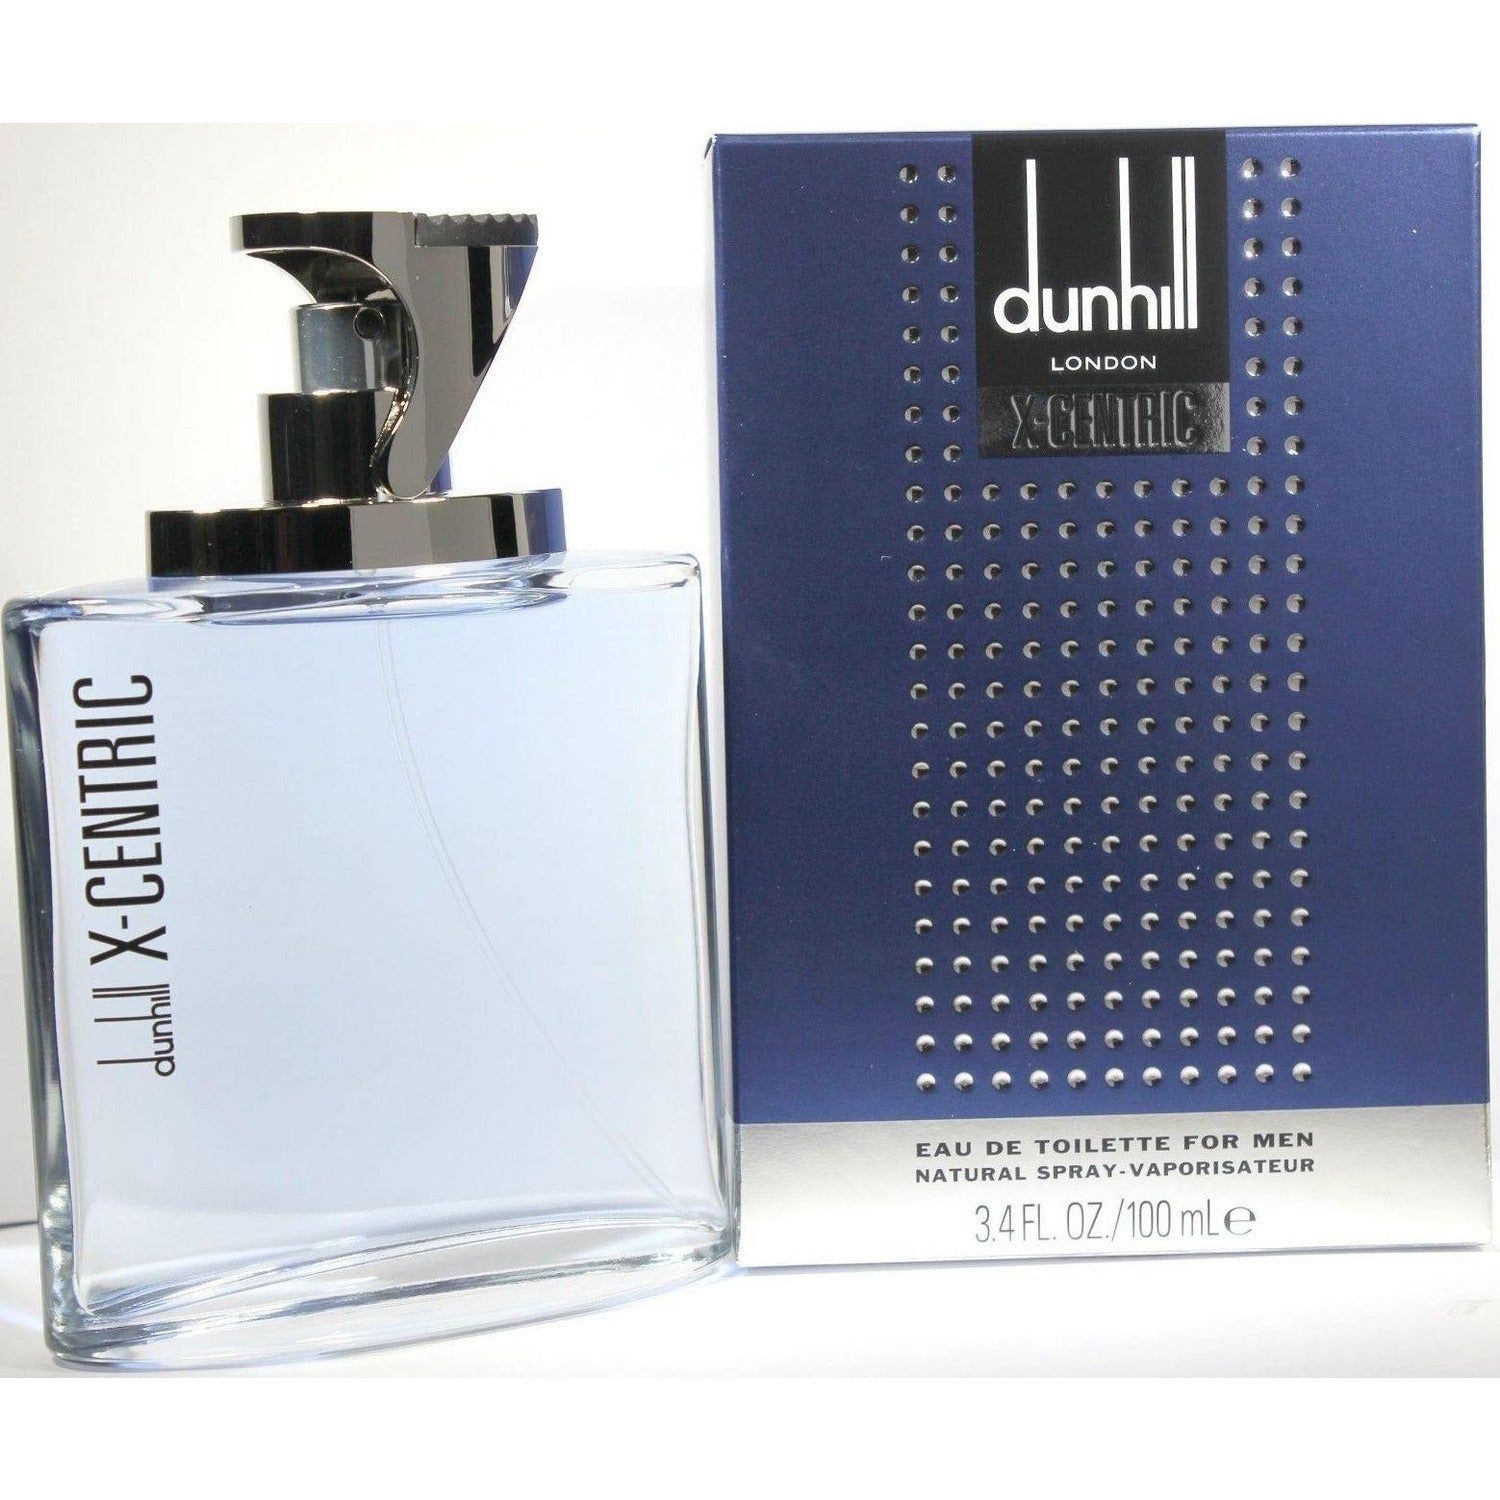 dunhill man cologne